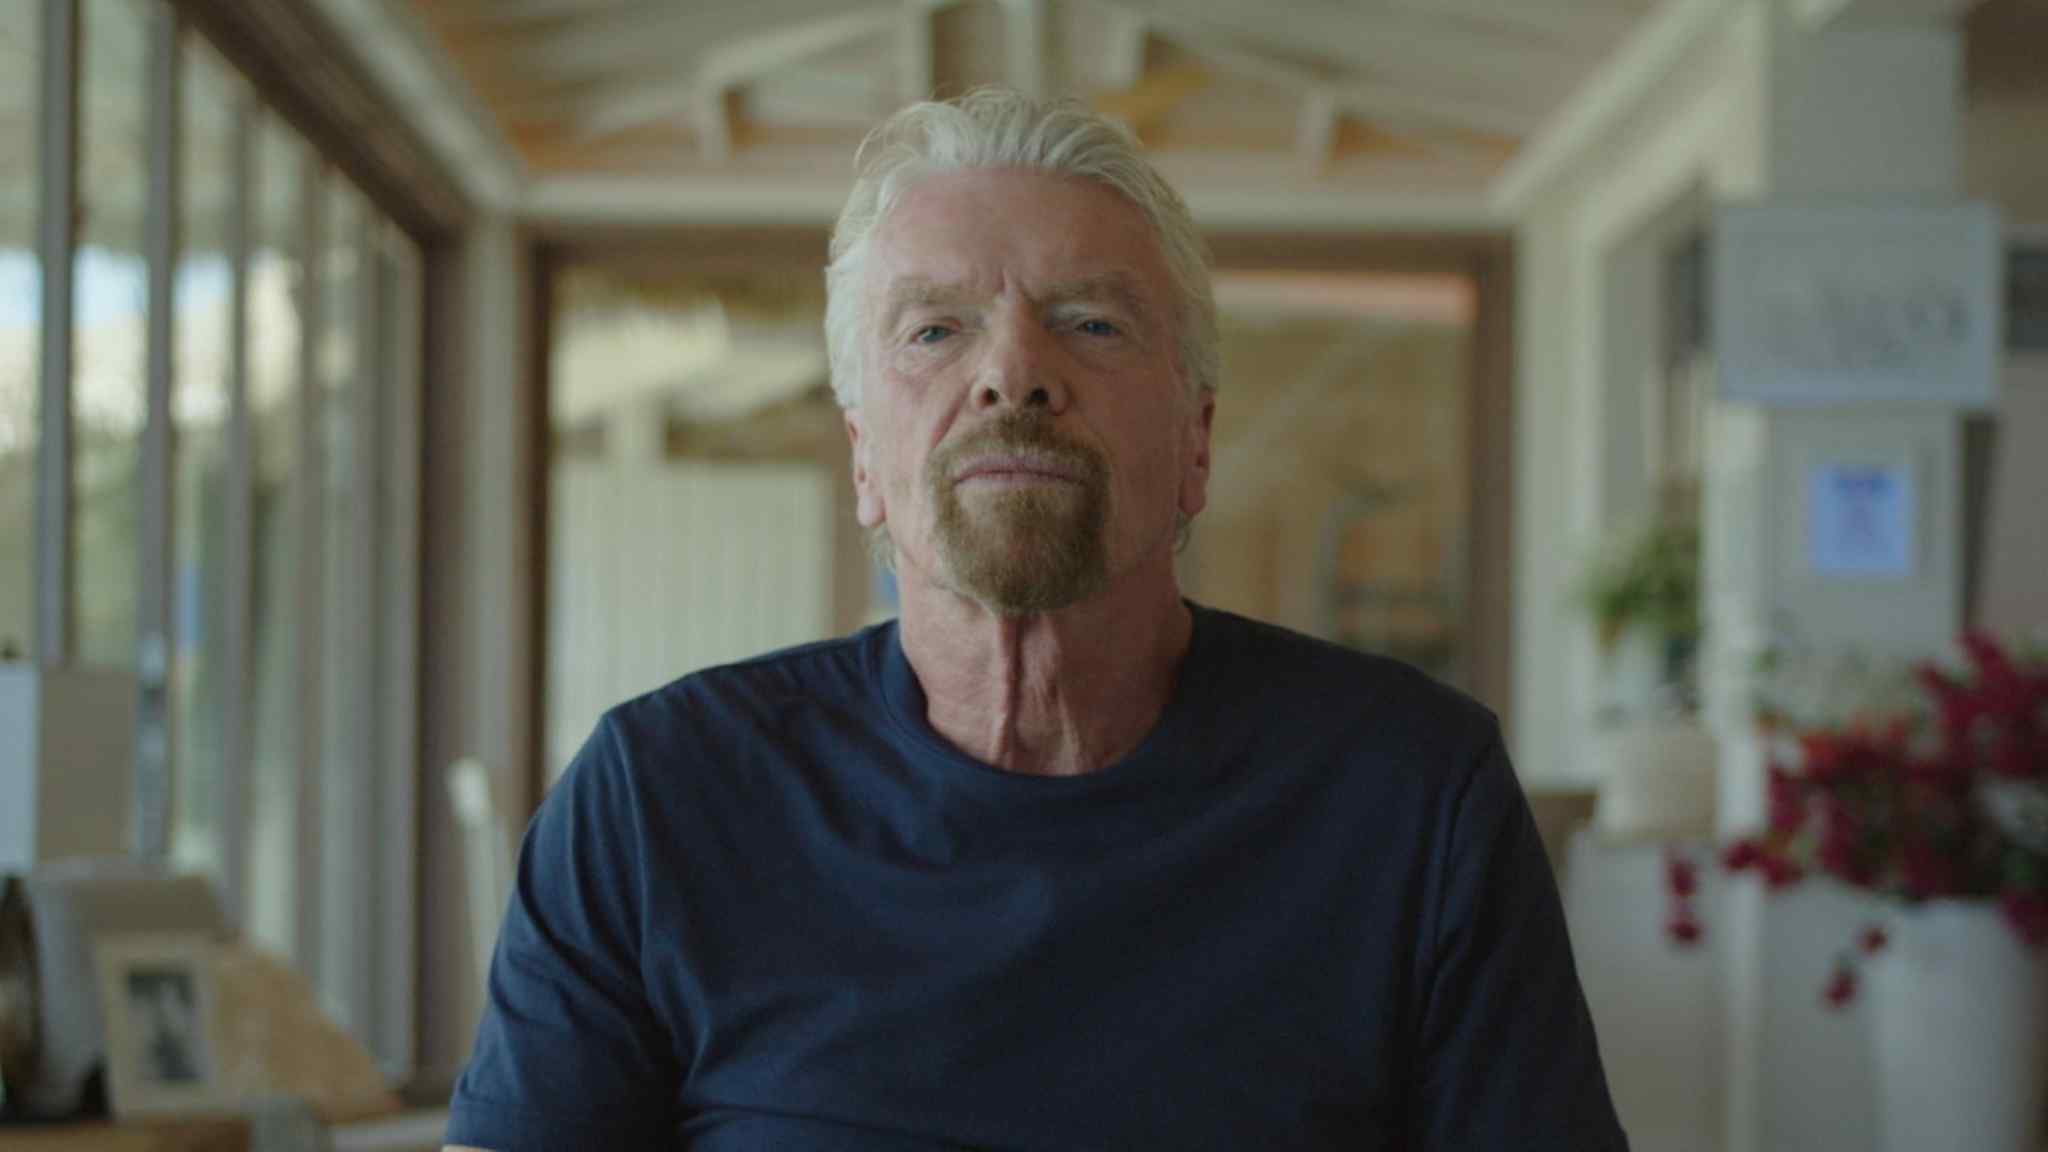 Branson — the story of a man with his own island and spaceship